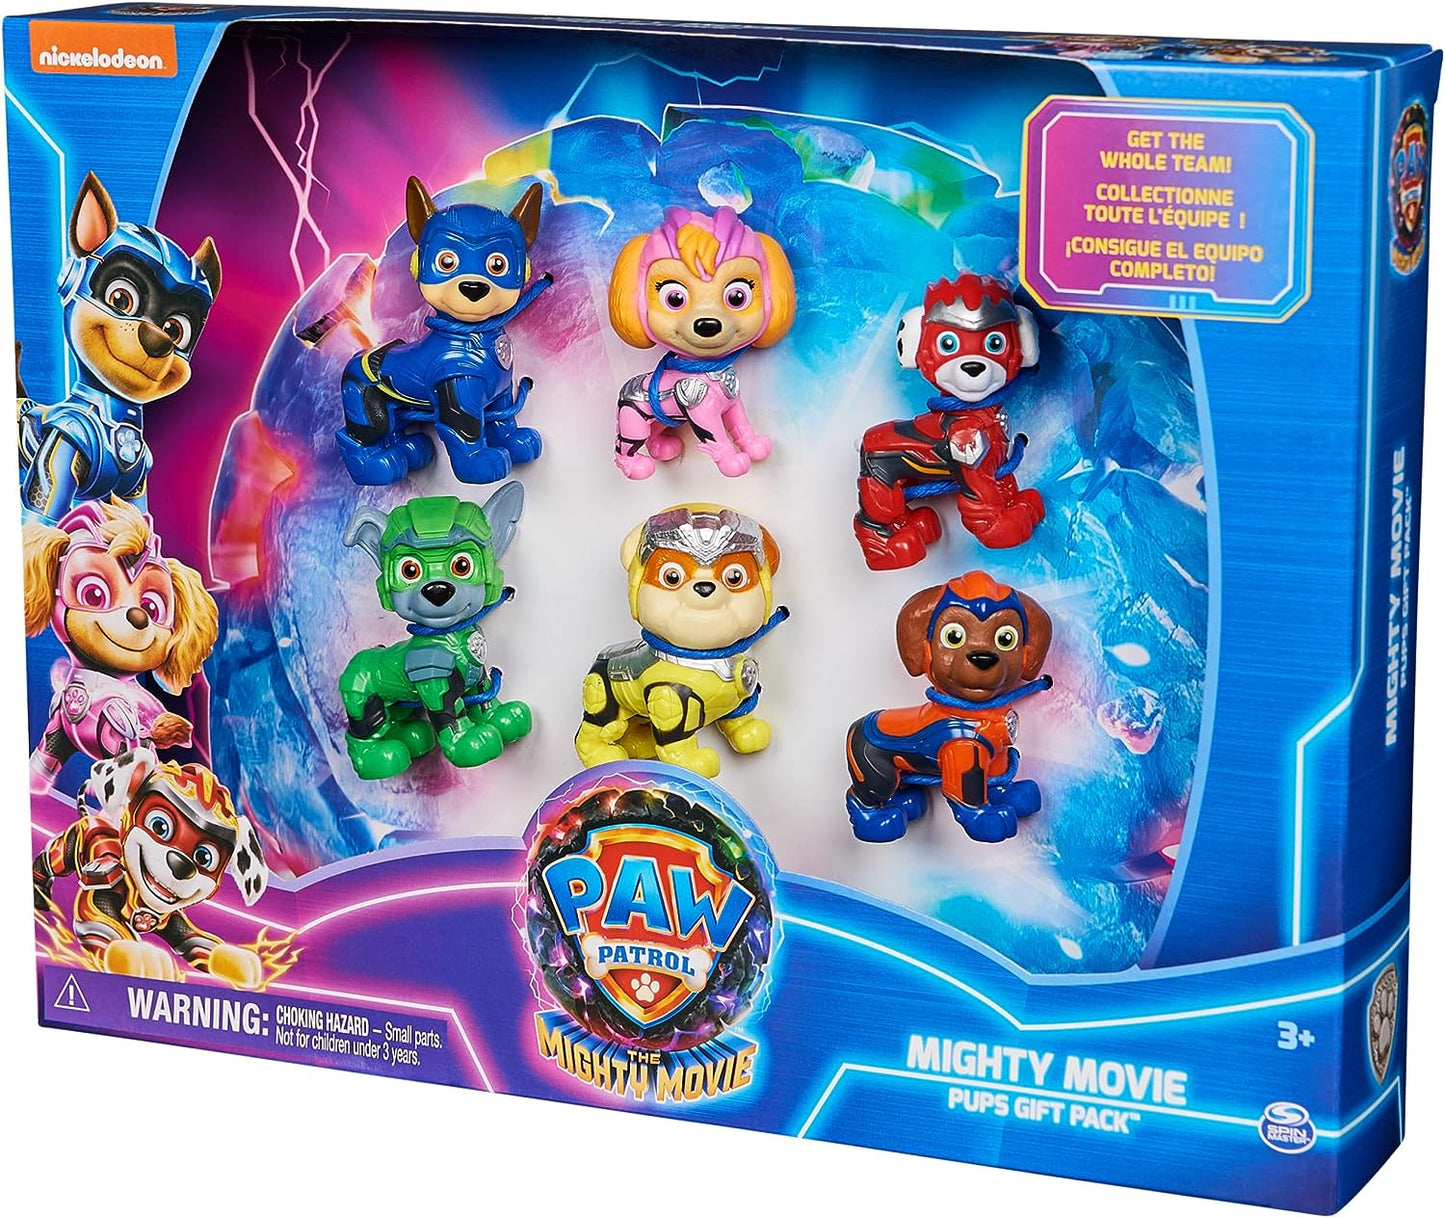 Paw Patrol: The Mighty Movie, Toy Figures Gift Pack, with 6 Collectible Action Figures, Kids Toys for Boys and Girls Ages 3 and up